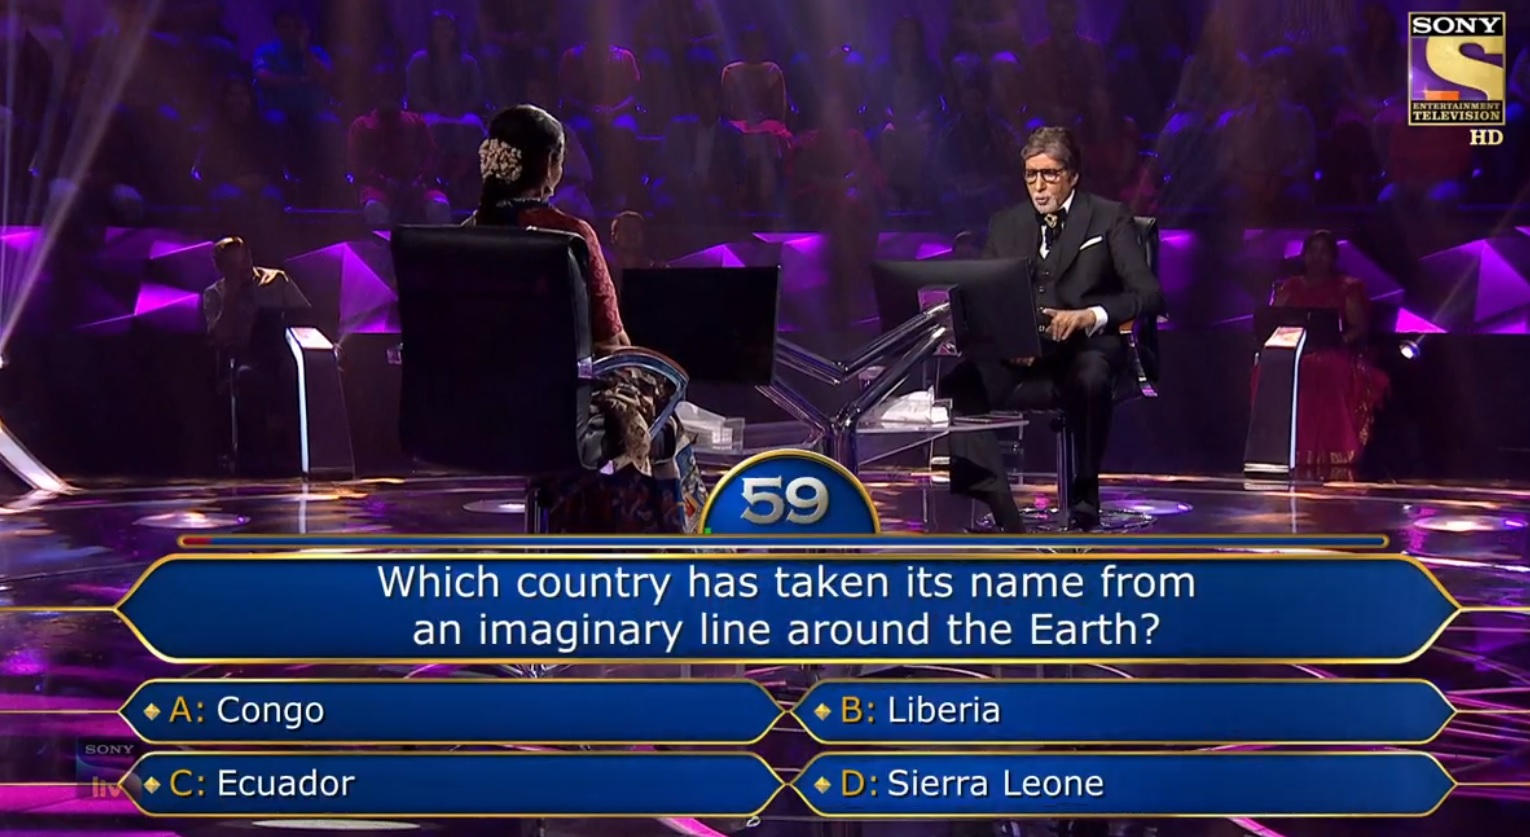 Ques : Which country has taken its name from an imaginary line around the Earth?